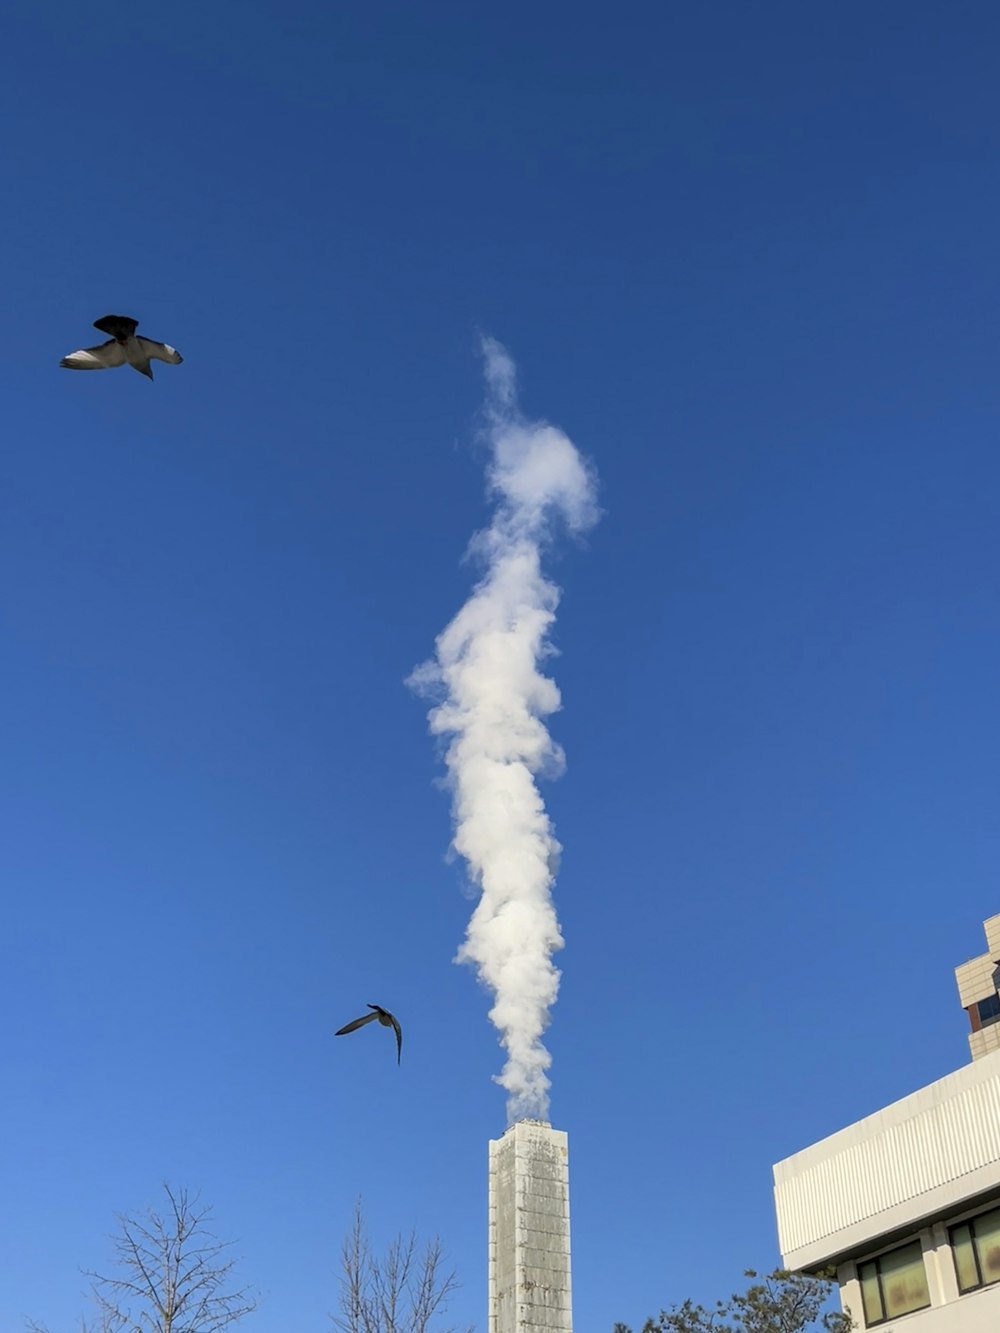 a smokestack emits from the top of a tall building